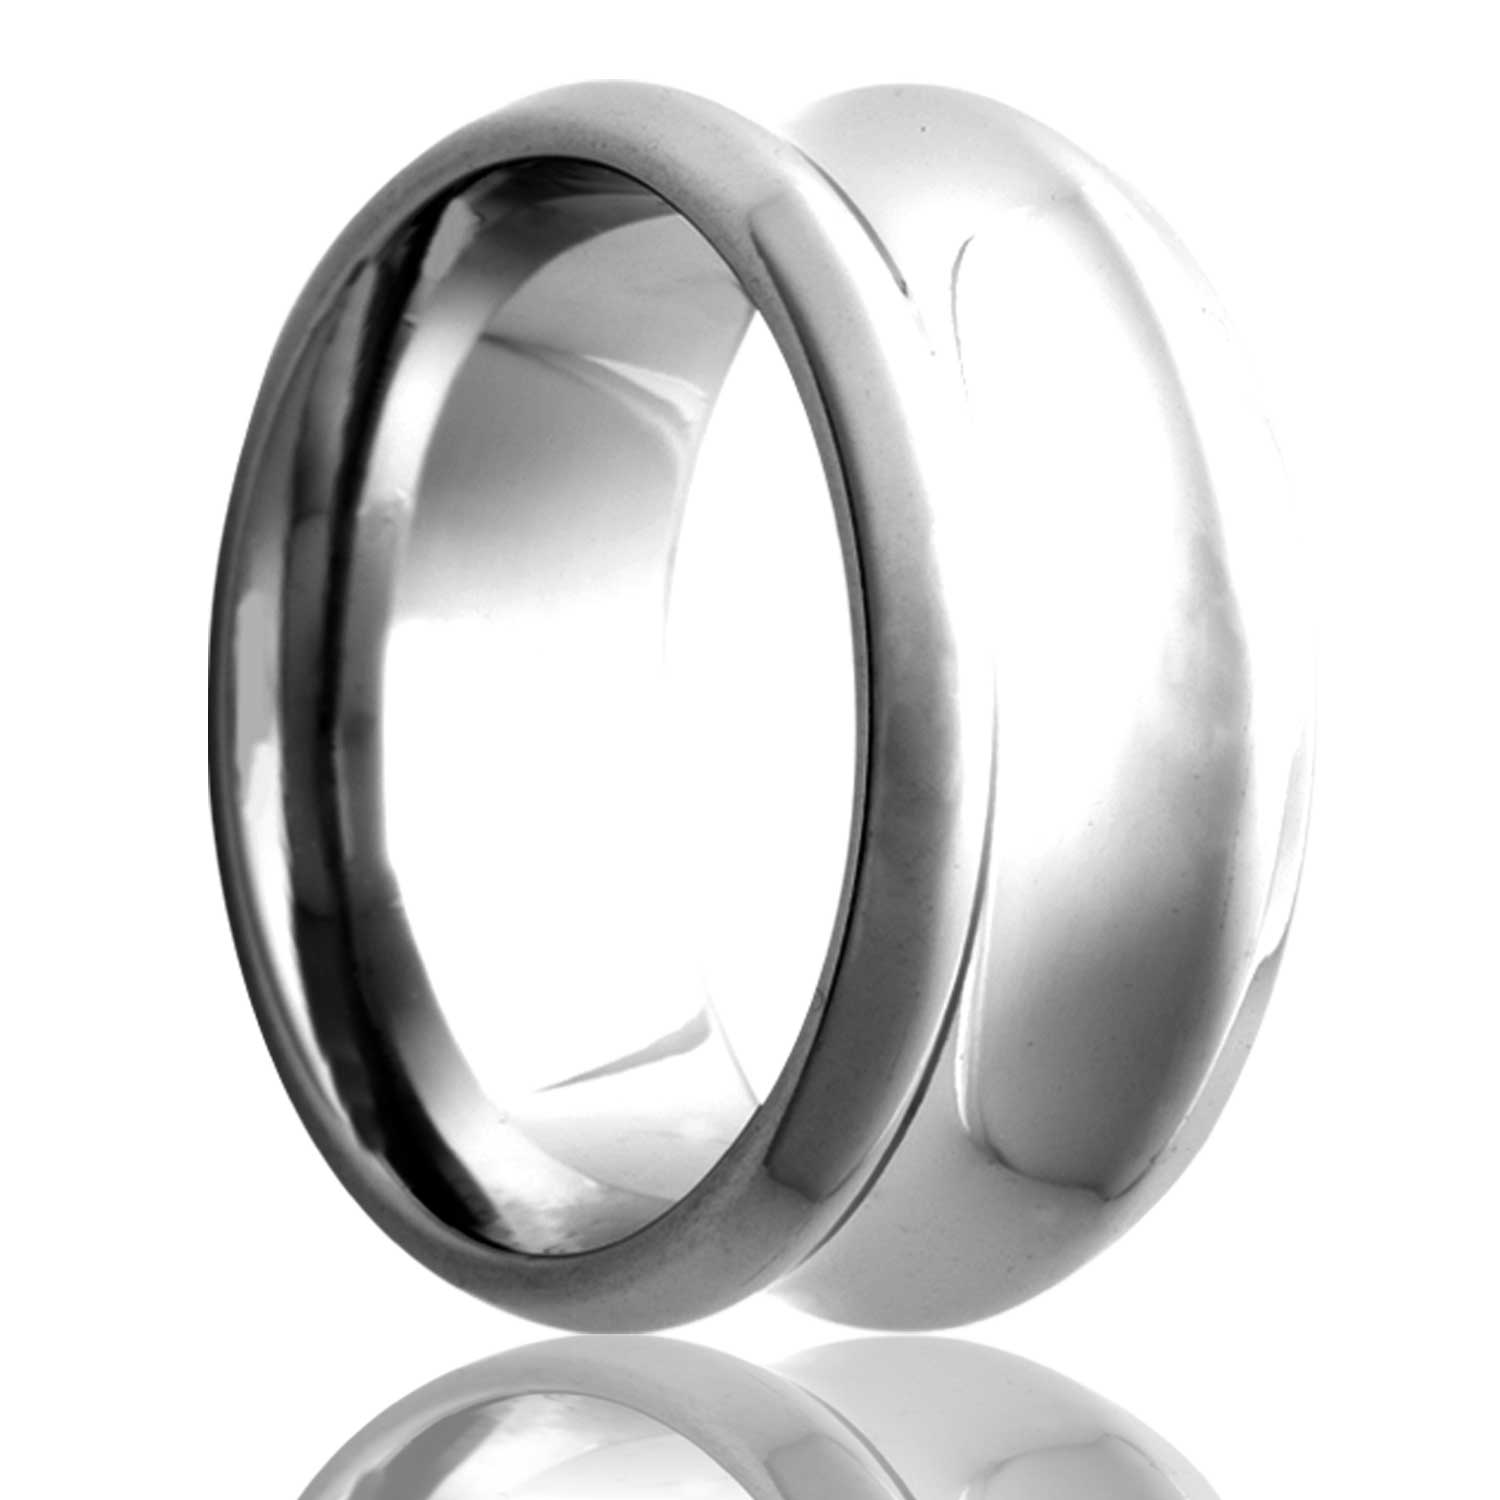 A concave cobalt wedding band with beveled edges displayed on a neutral white background.